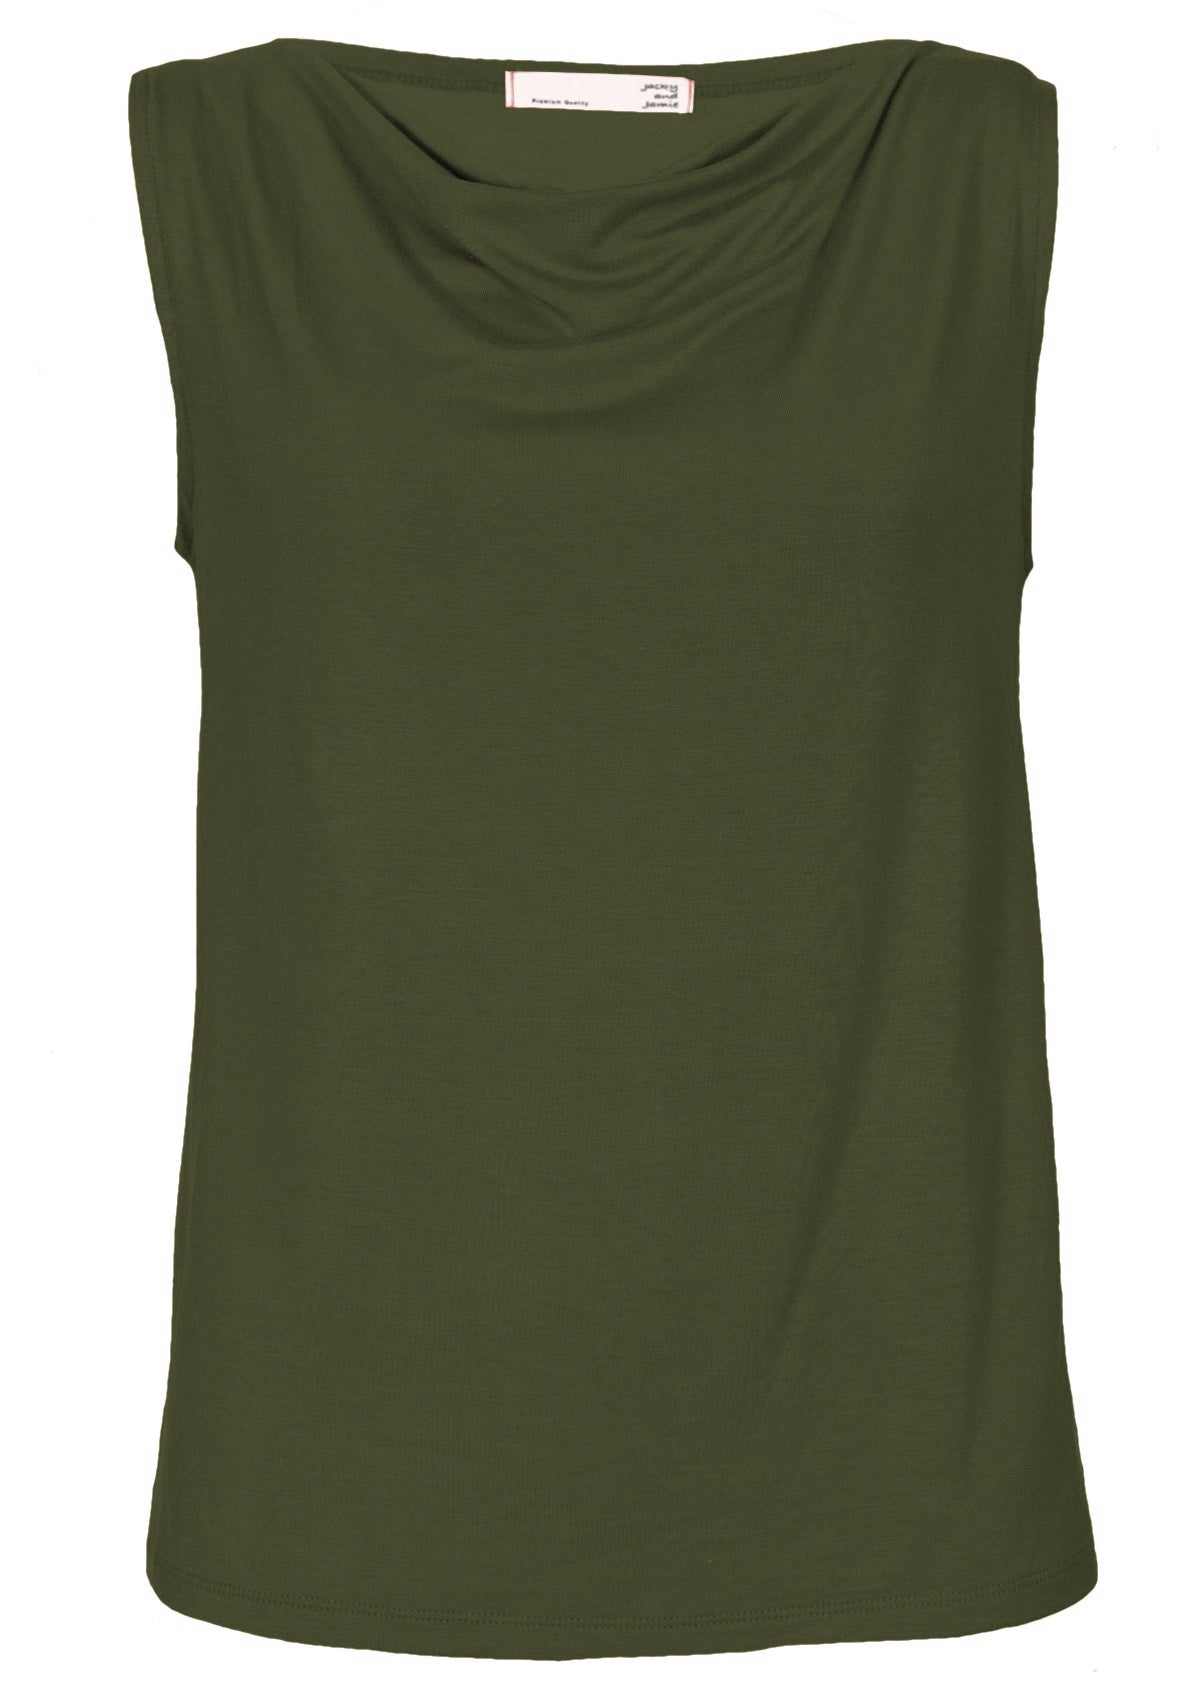 Front view olive green cowl neck rayon singlet top